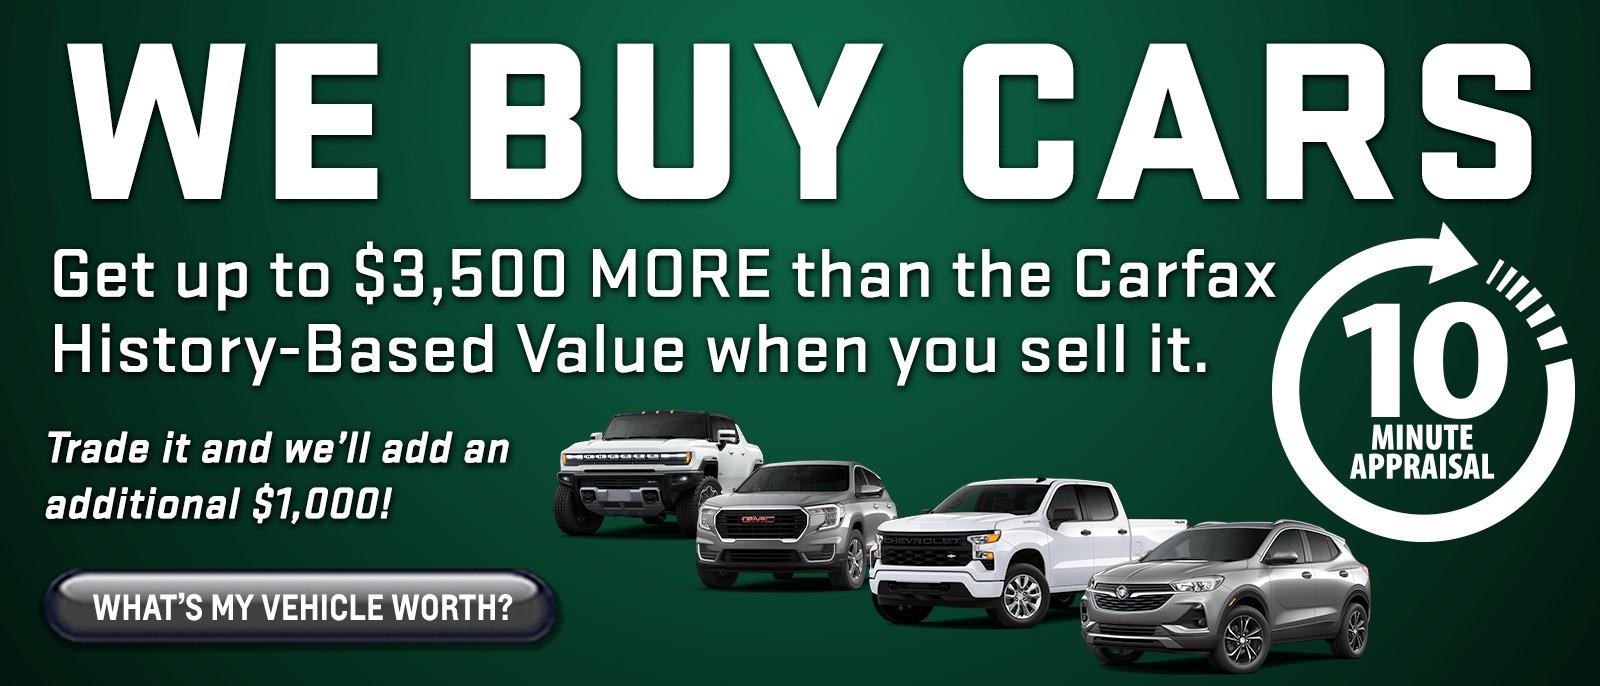 We Buy Cars | Get up to $3,500 MORE than the Carfax history-based value when you sell it